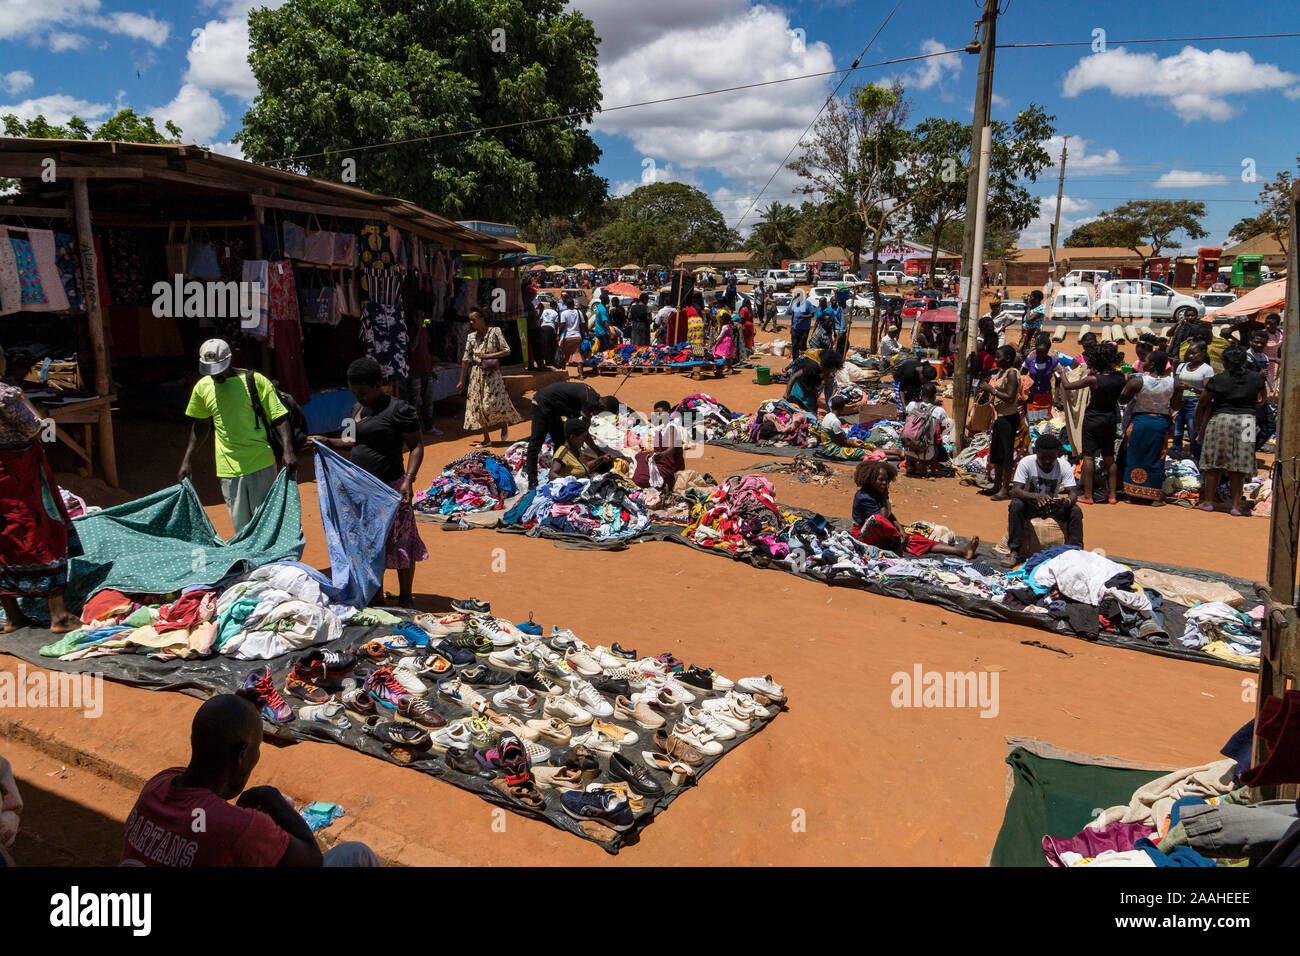 Clothes for sale on the ground in Mzuzu market,  Malawi Stock Photo